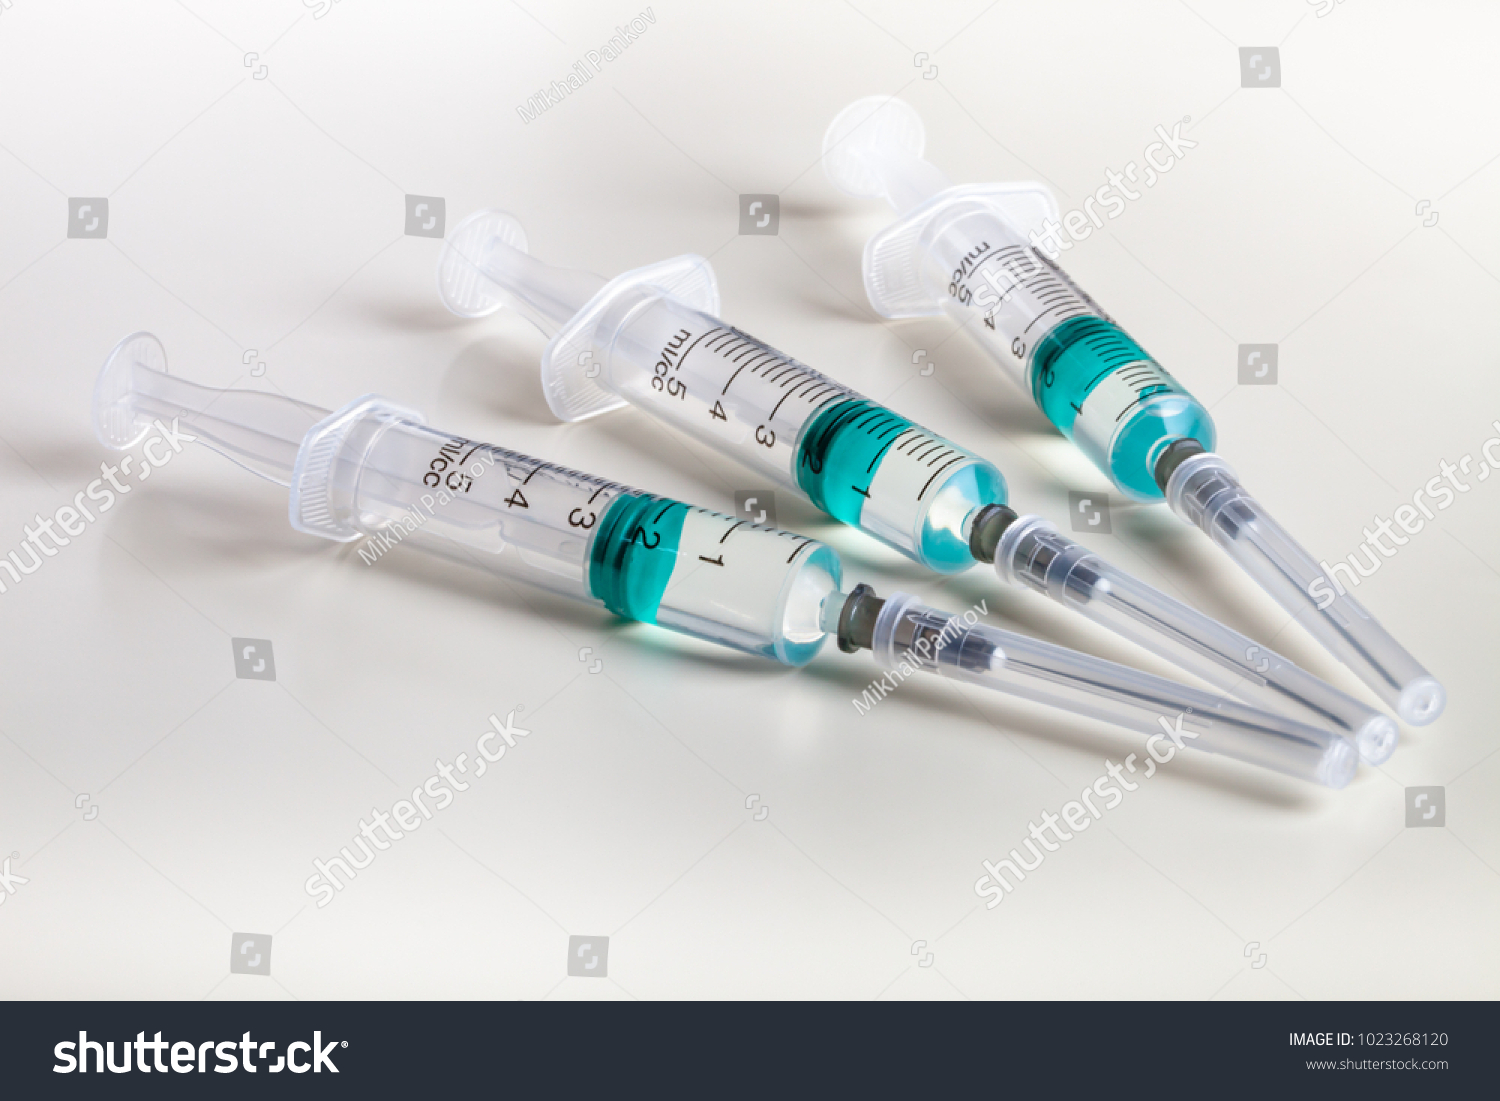 Several syringe on white table prepared for injection in hospital #1023268120